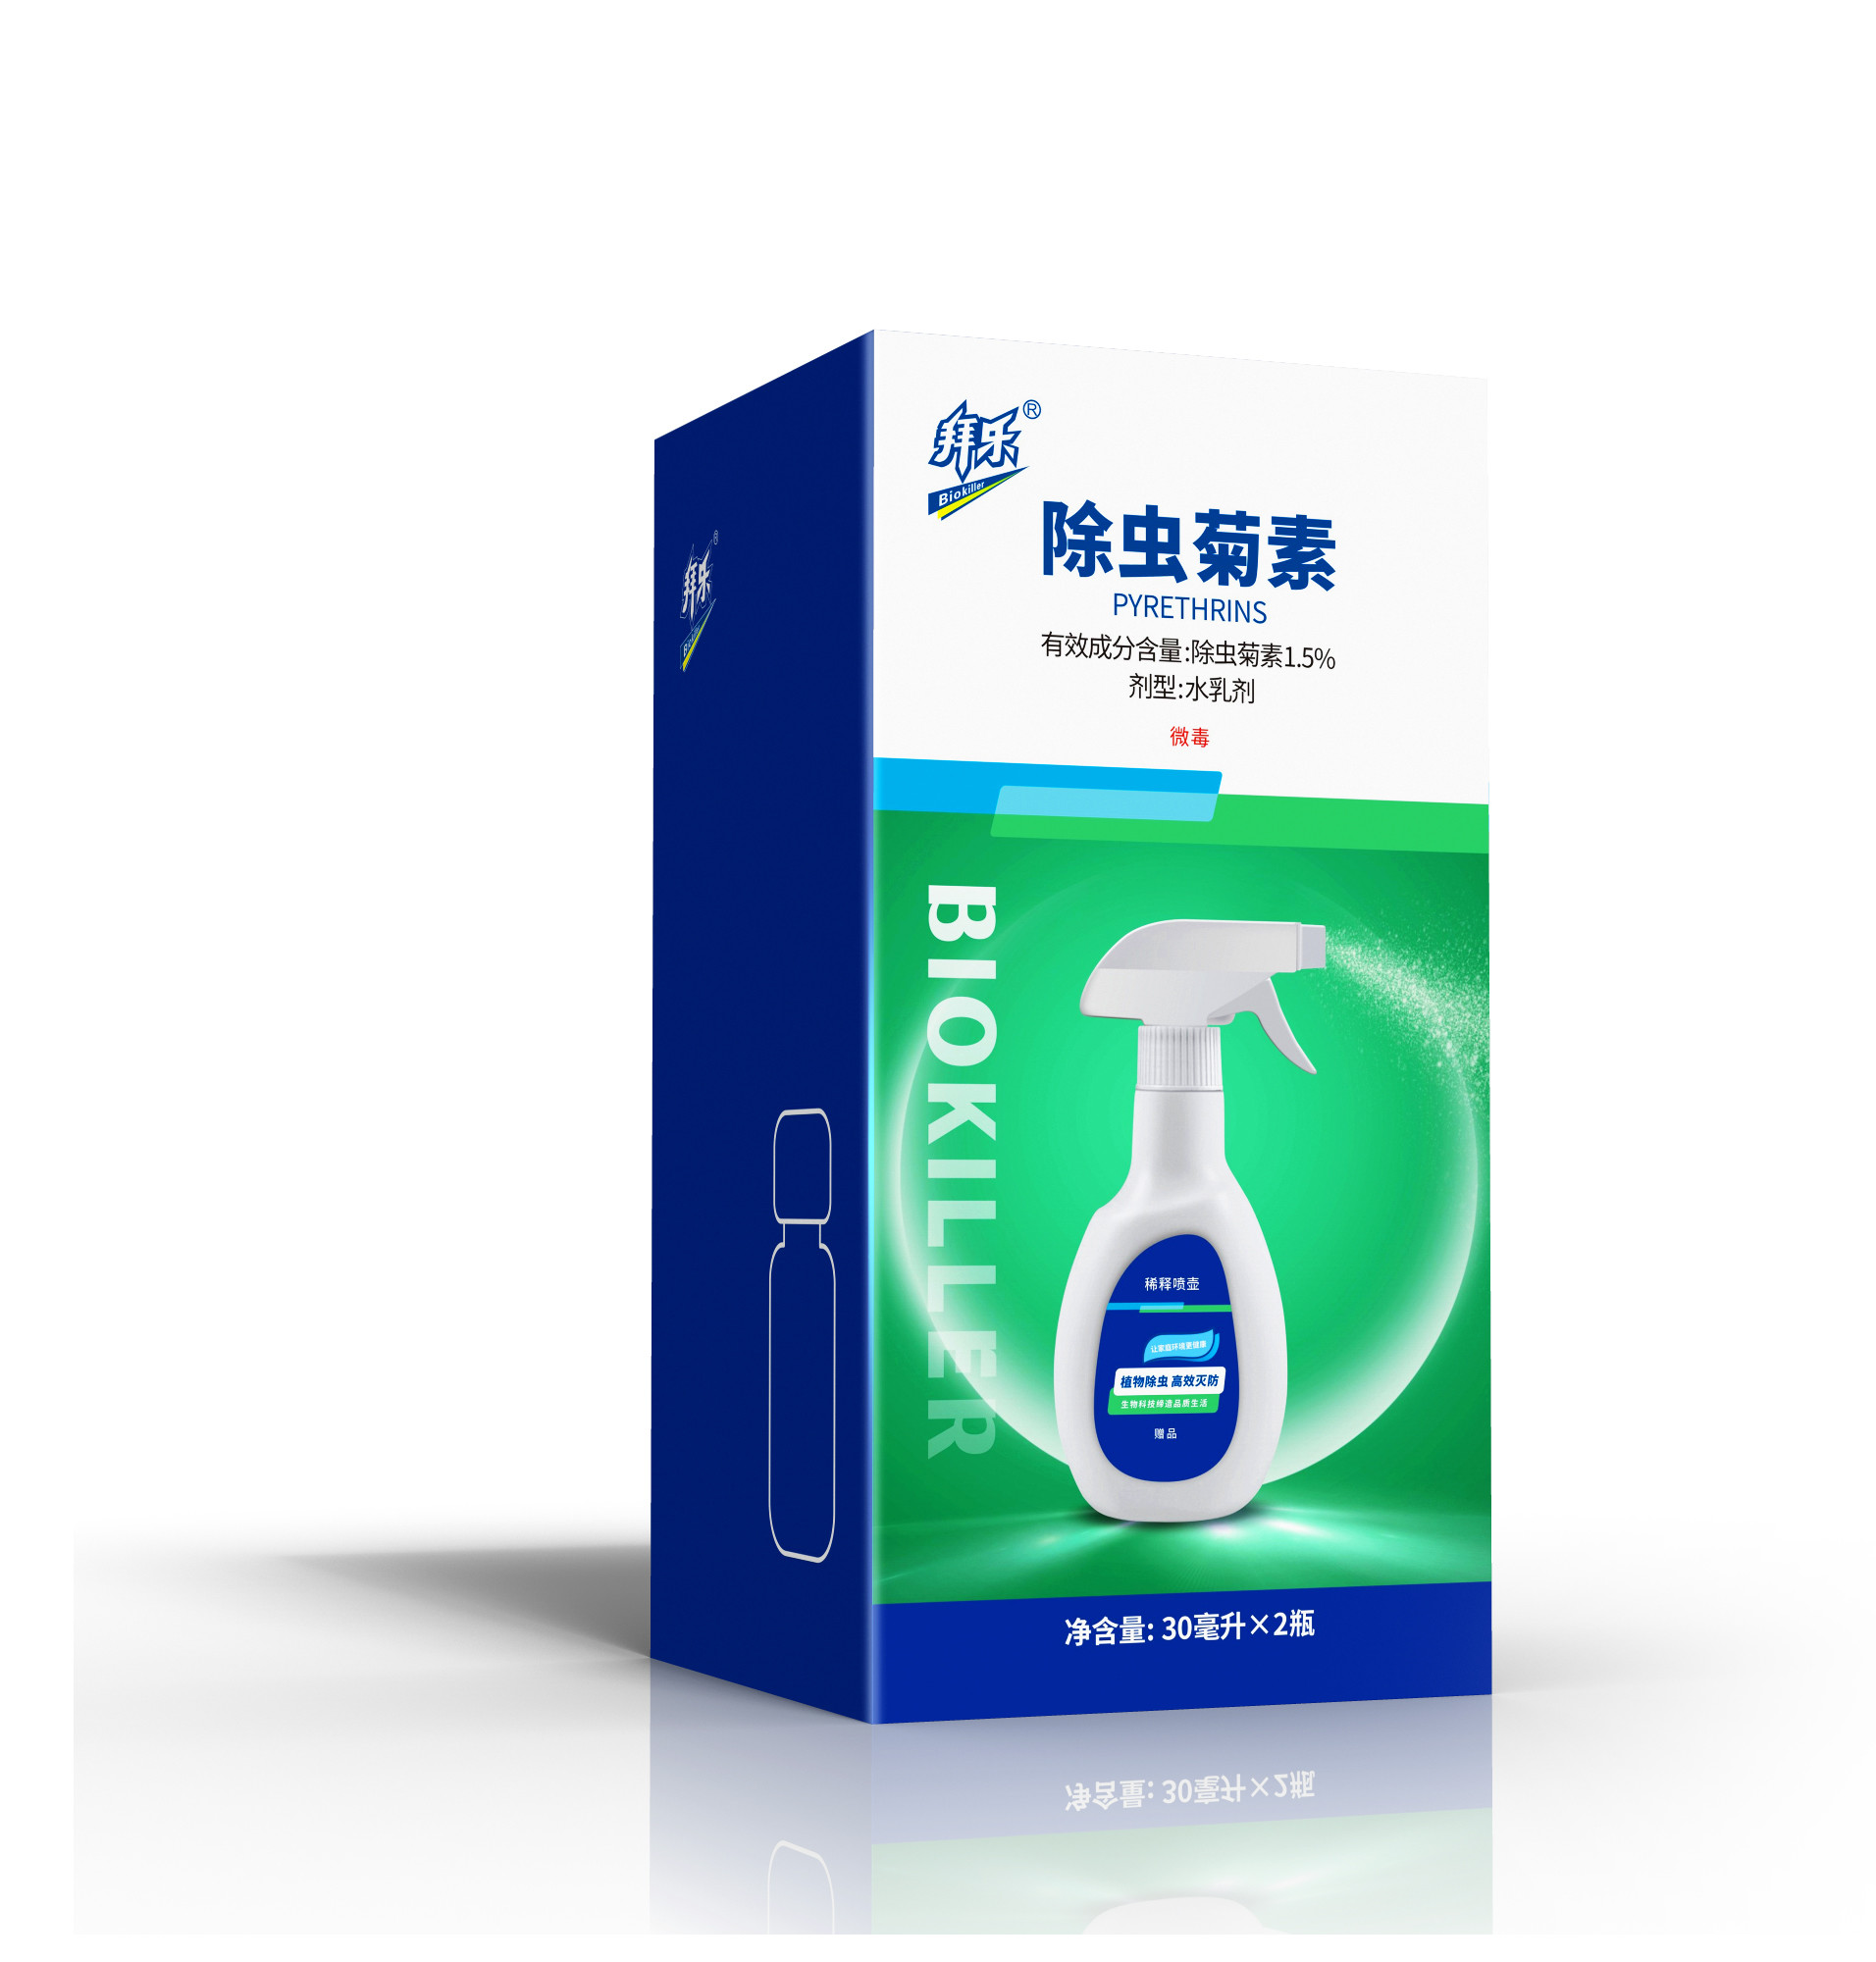 China EU Formulated 1.5% Natural Pyrethrin No Residue No Side Effects on Humans Animals 30ml/Bottle*2 on sale